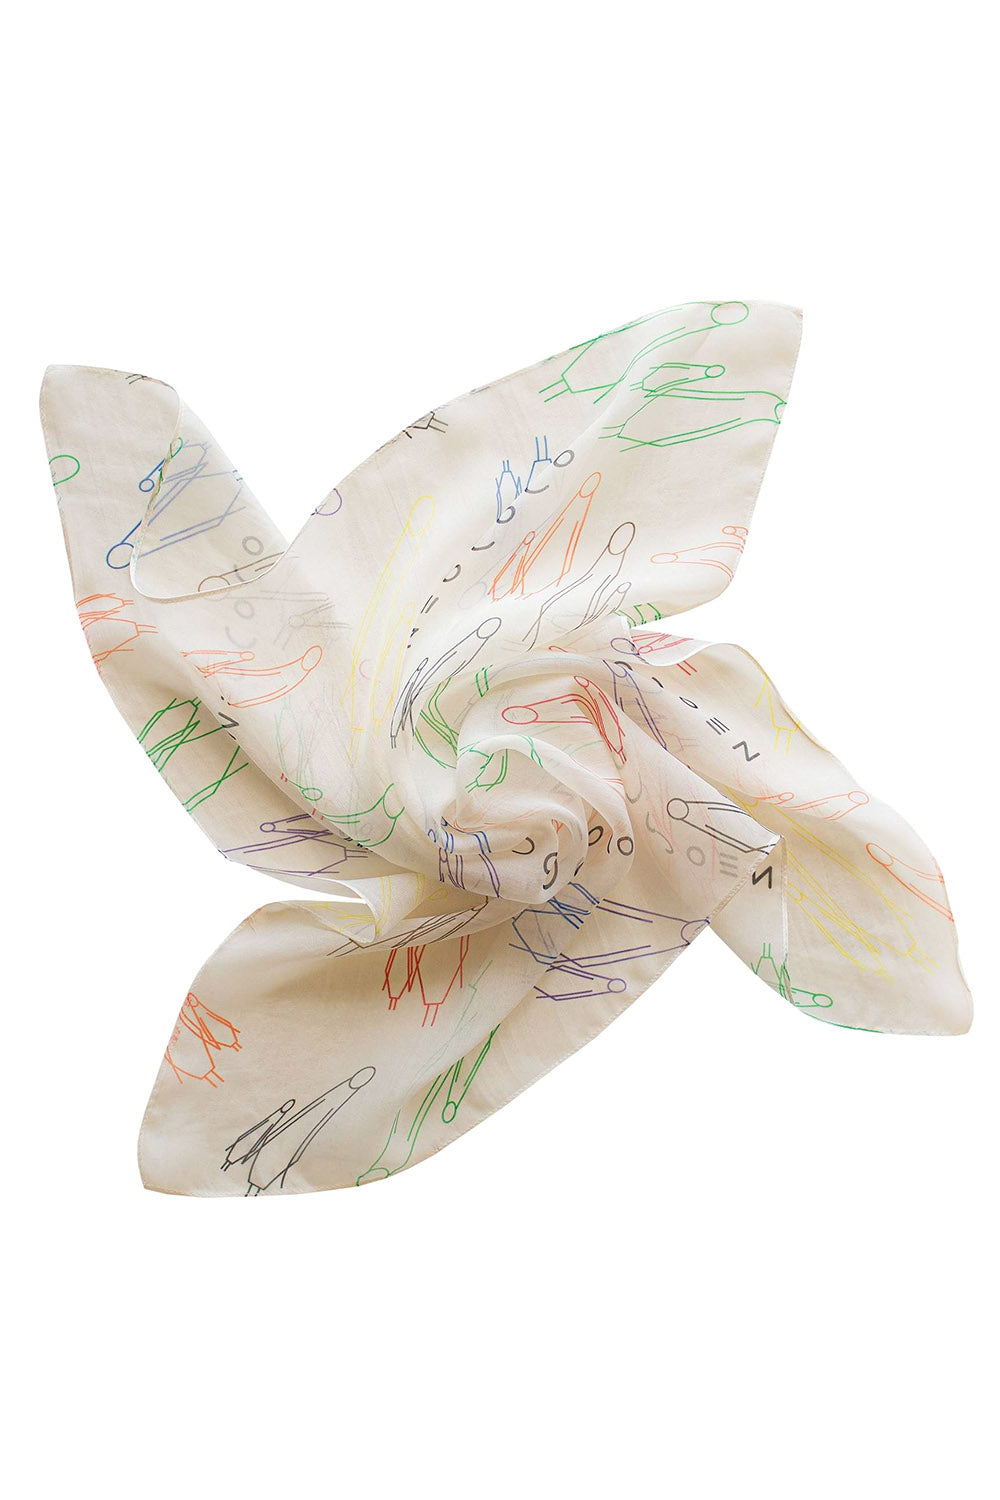 Biodegradable silk scarves. Gifts for her. Gift boxes